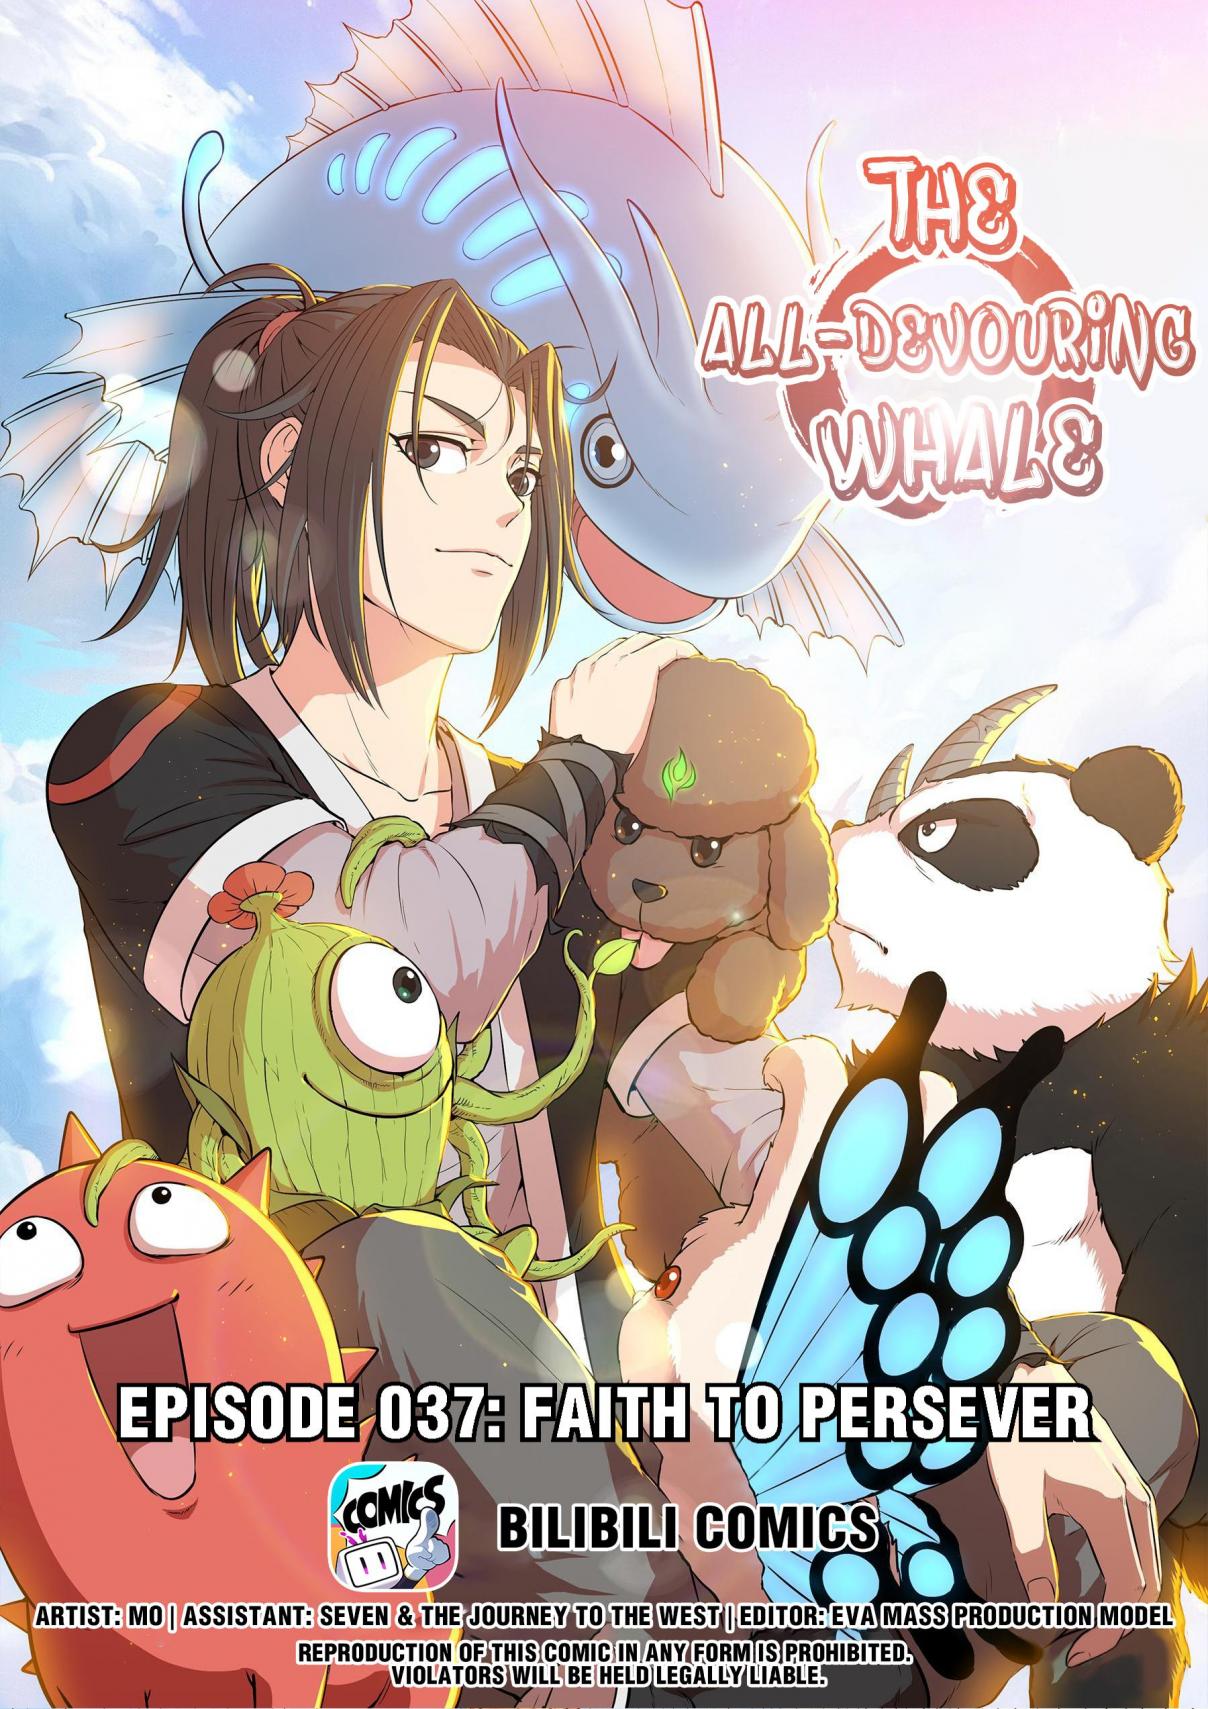 The All-devouring Whale 37 Faith to Persevere